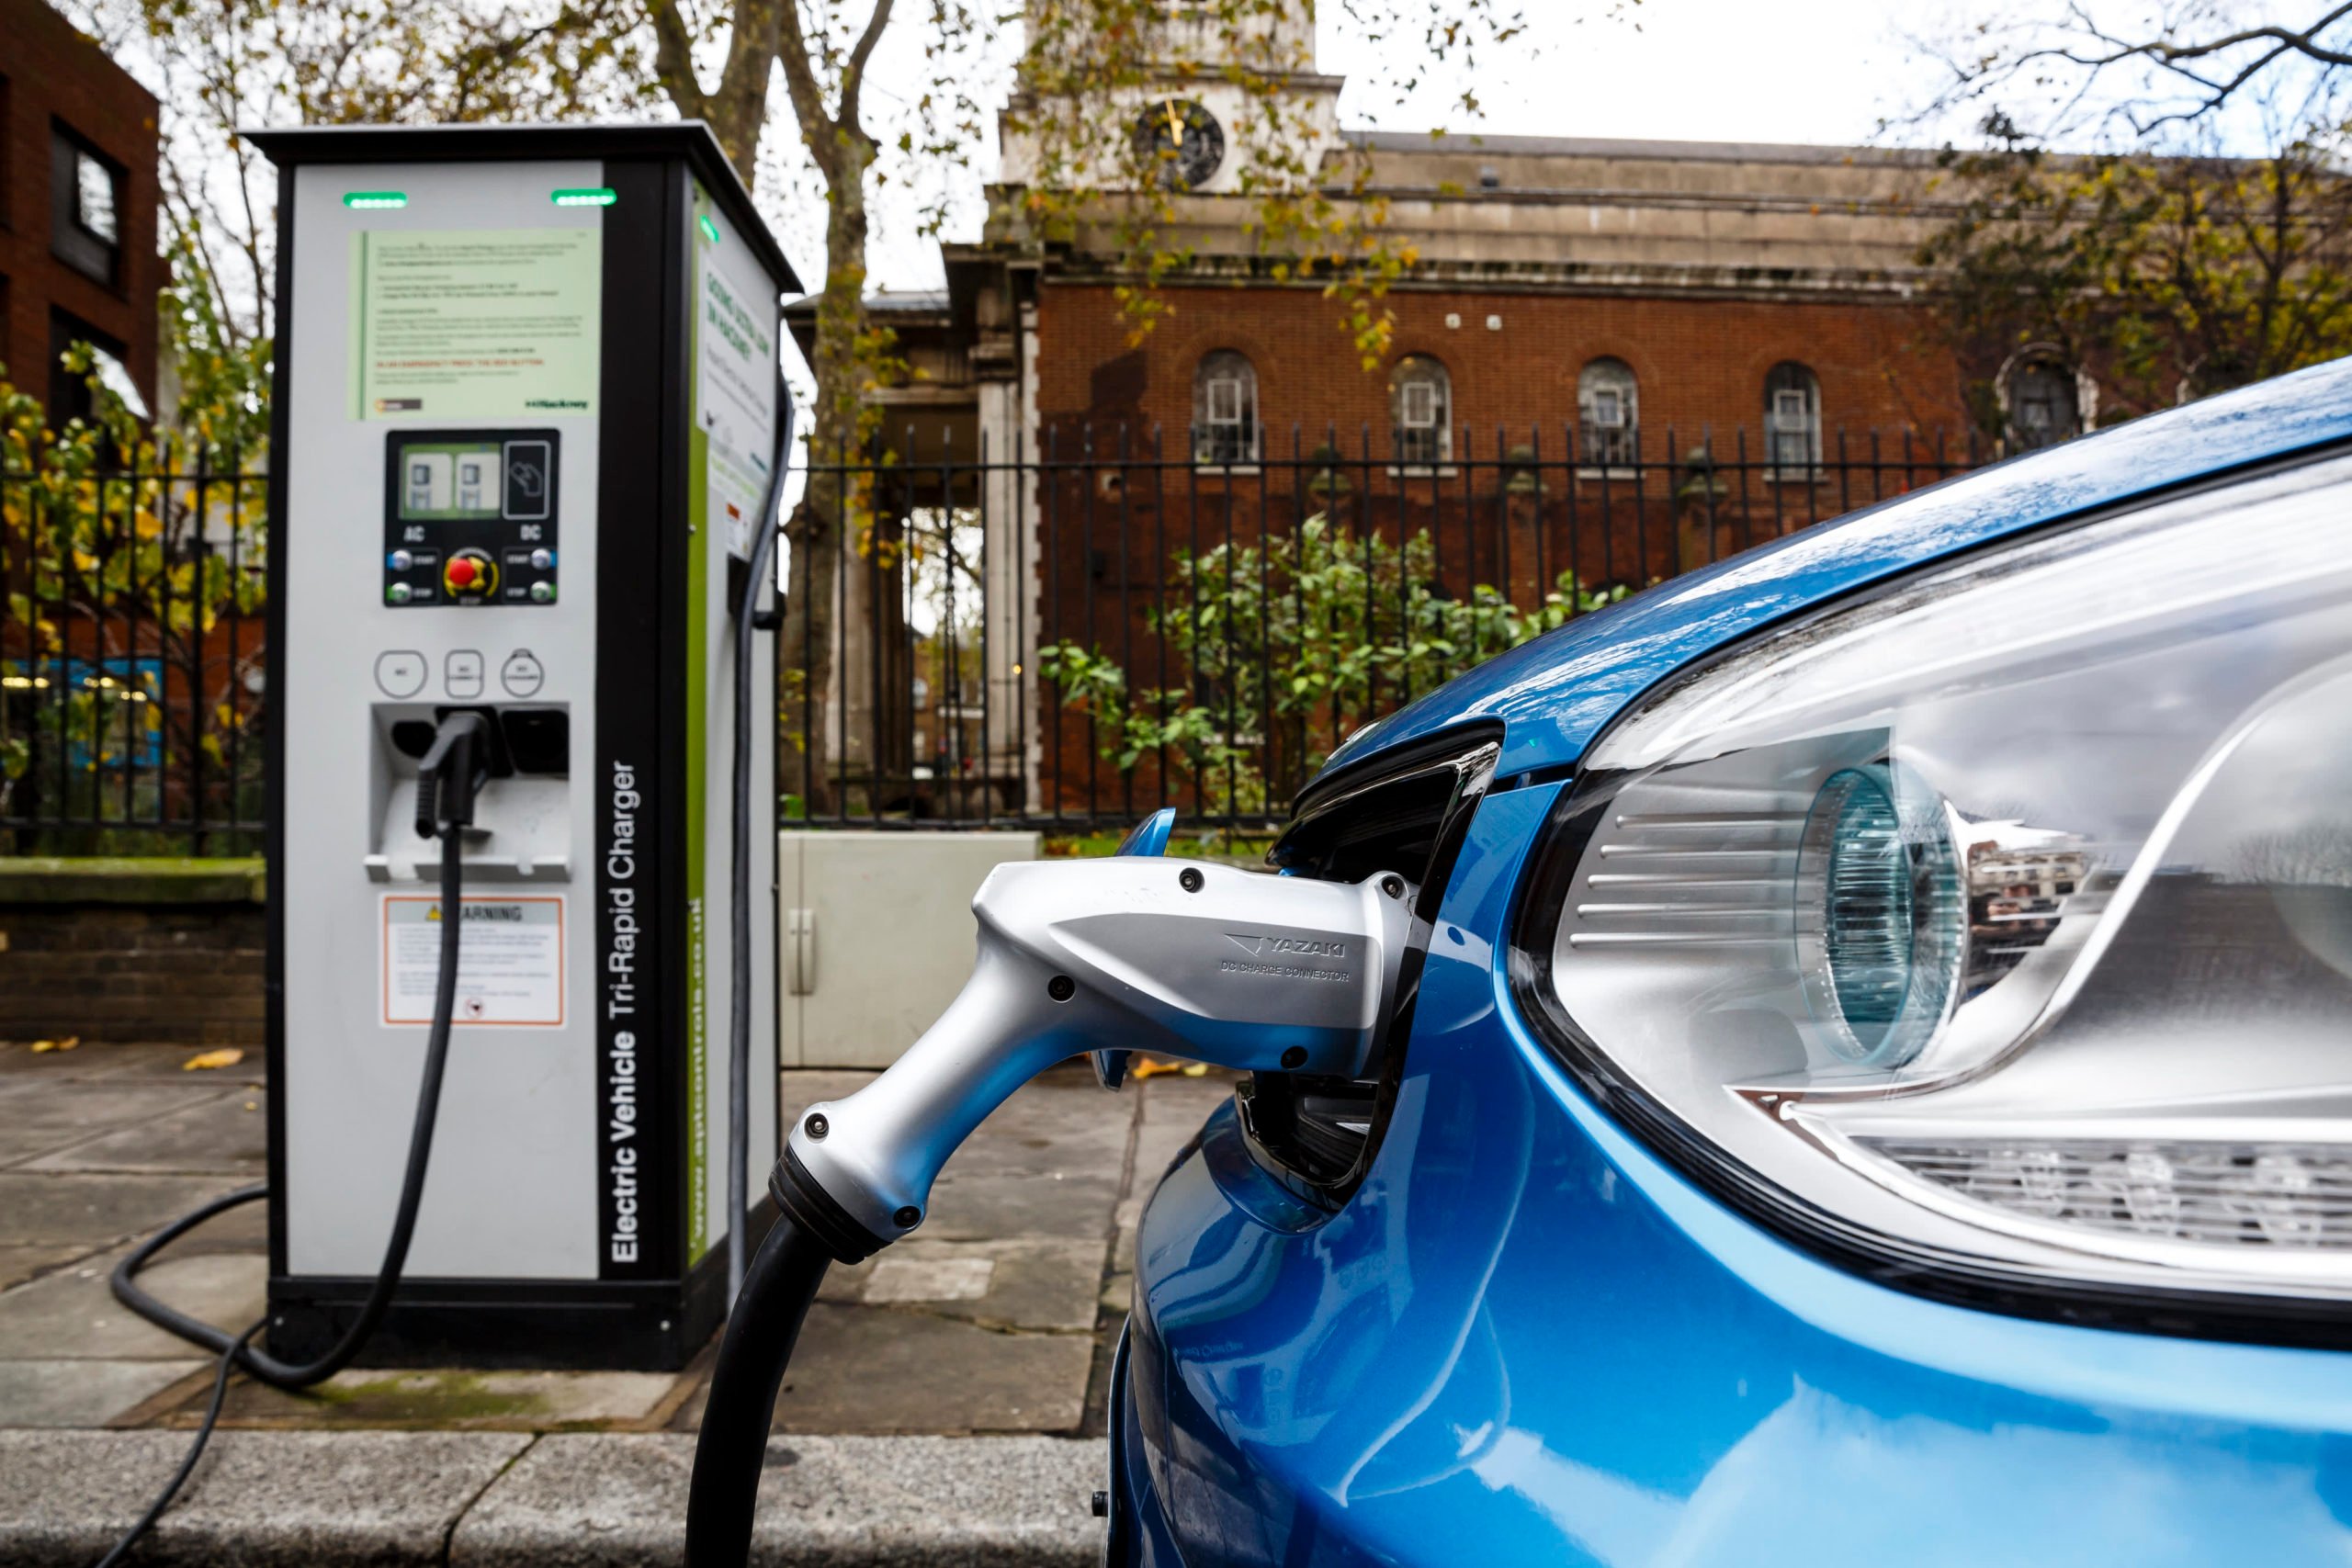 Morgan Stanley says a new type of battery will give EVs a boost — and names 2 stocks to cash in